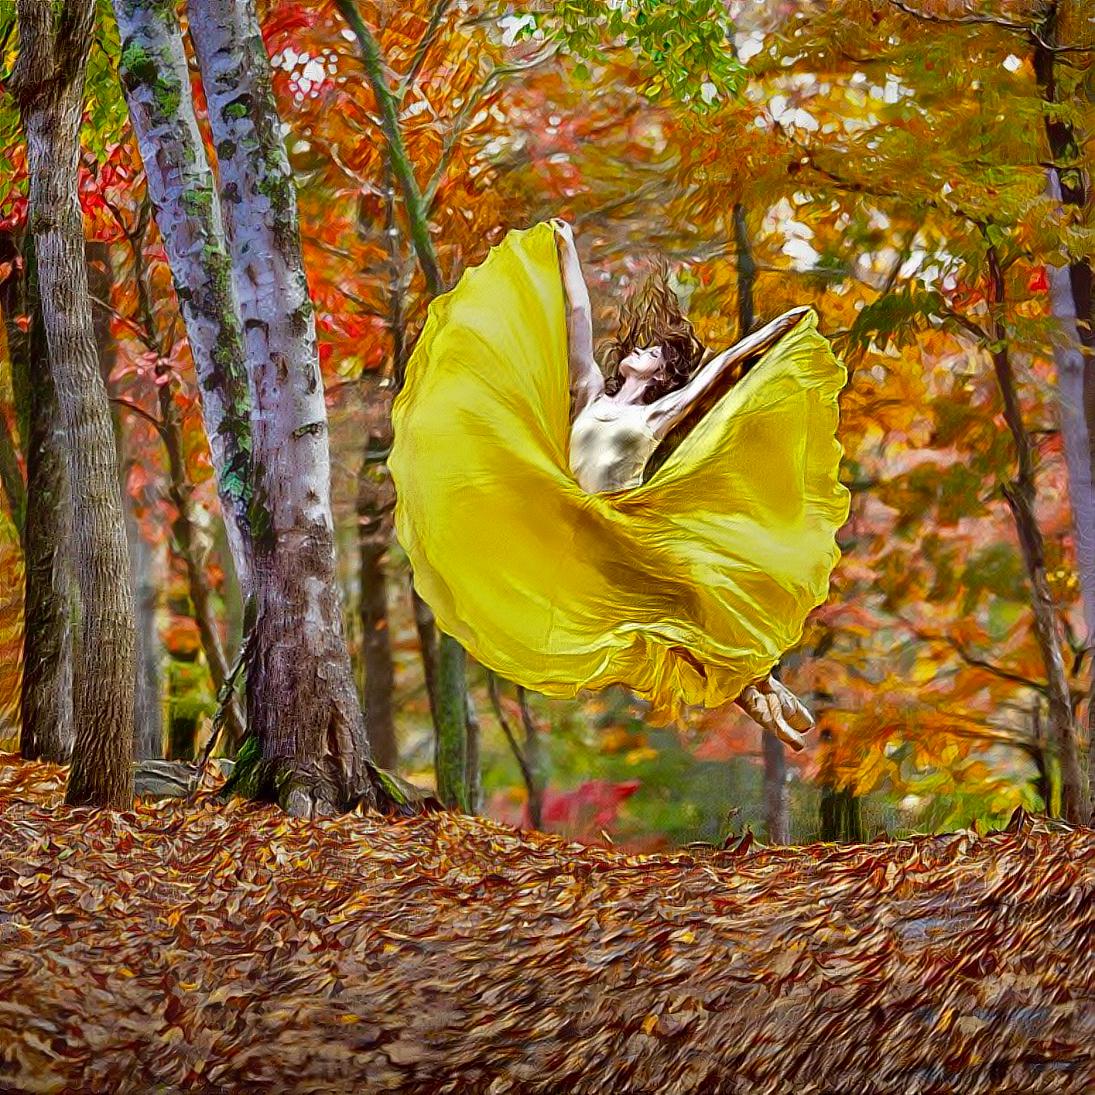 Dancer Series: Leap into Fall